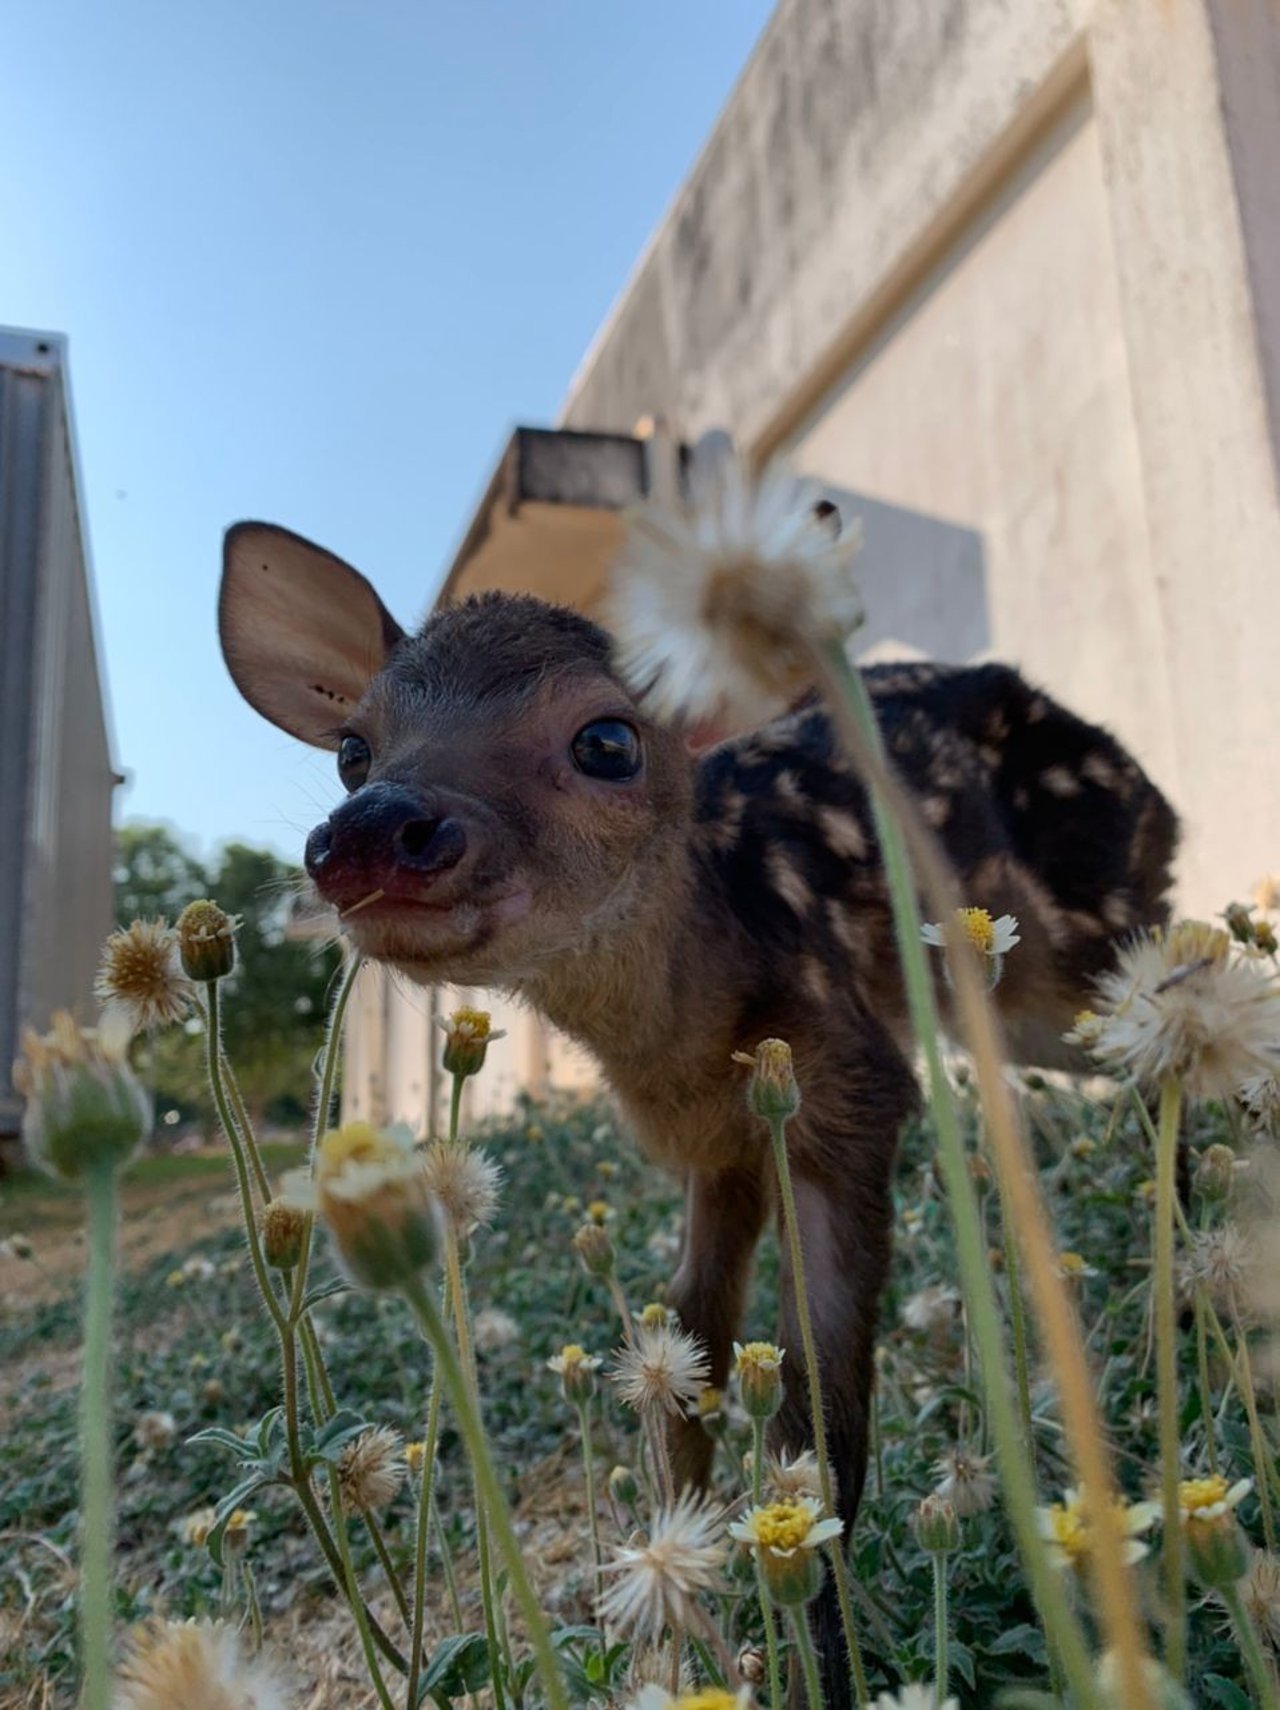 A orphaned baby deer standing in grass